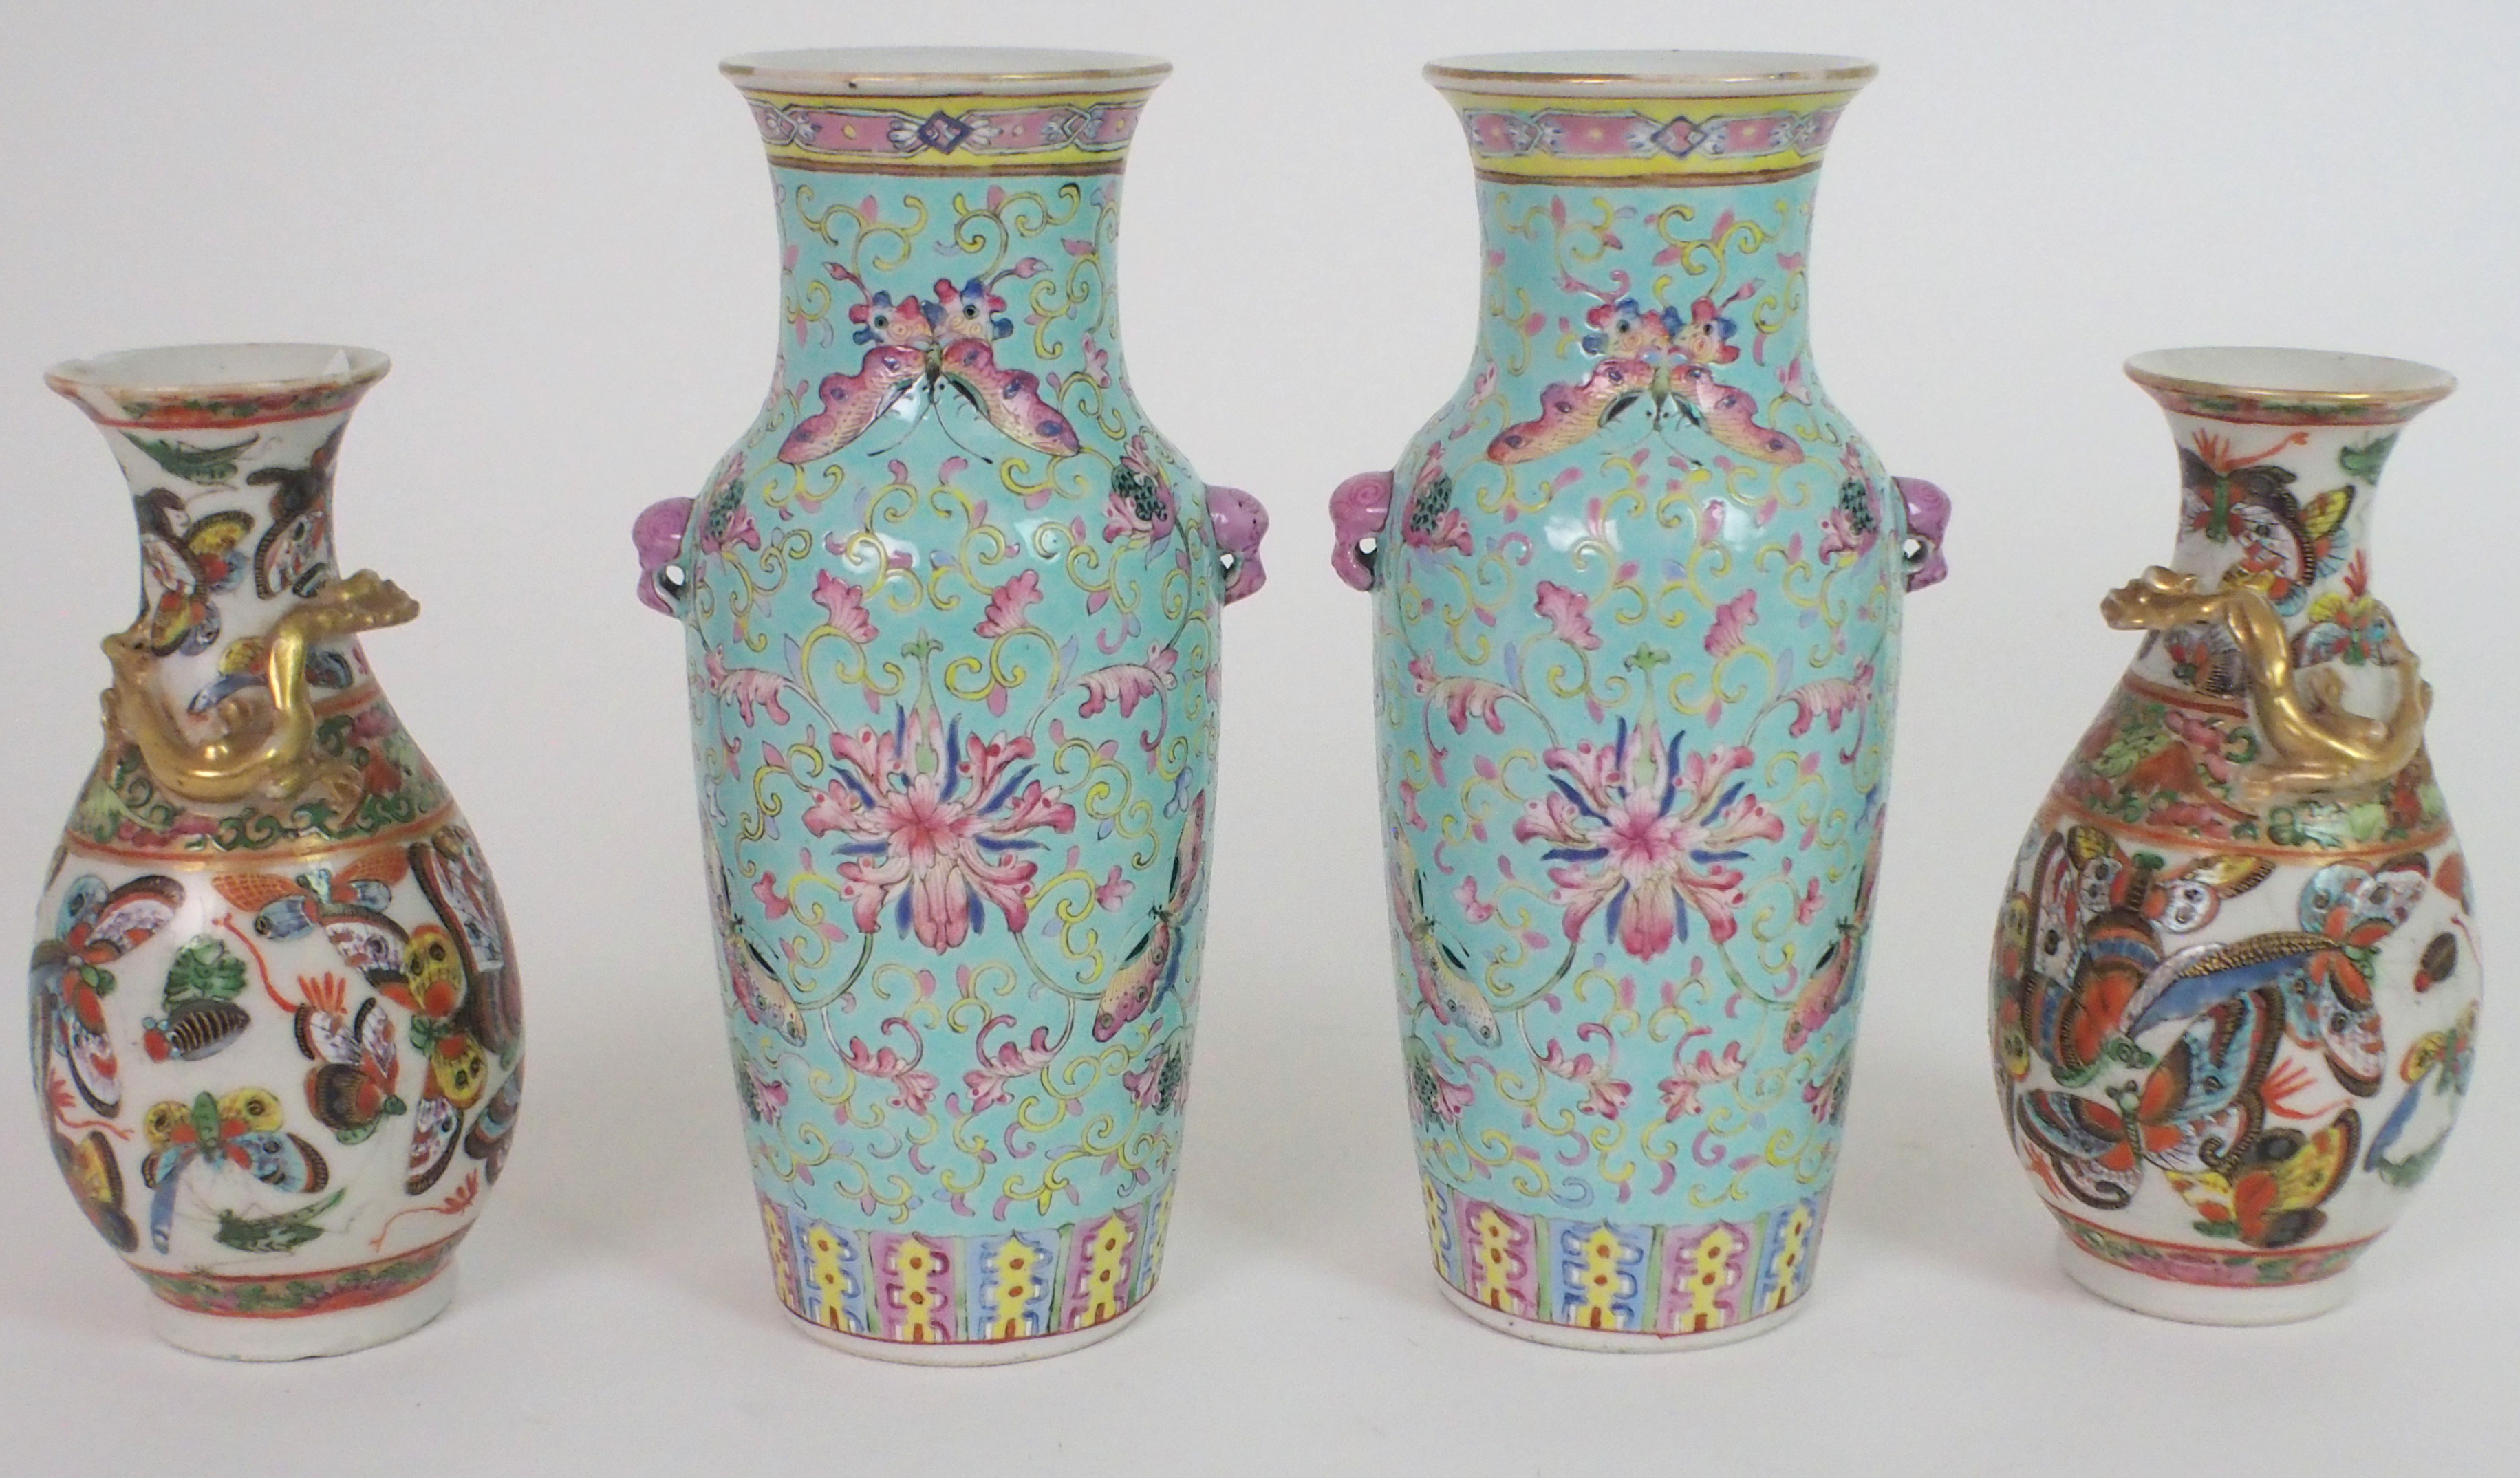 A PAIR OF CHINESE LILAC GROUND VASES paainted with butterflies, peonies and scrolling foliage,